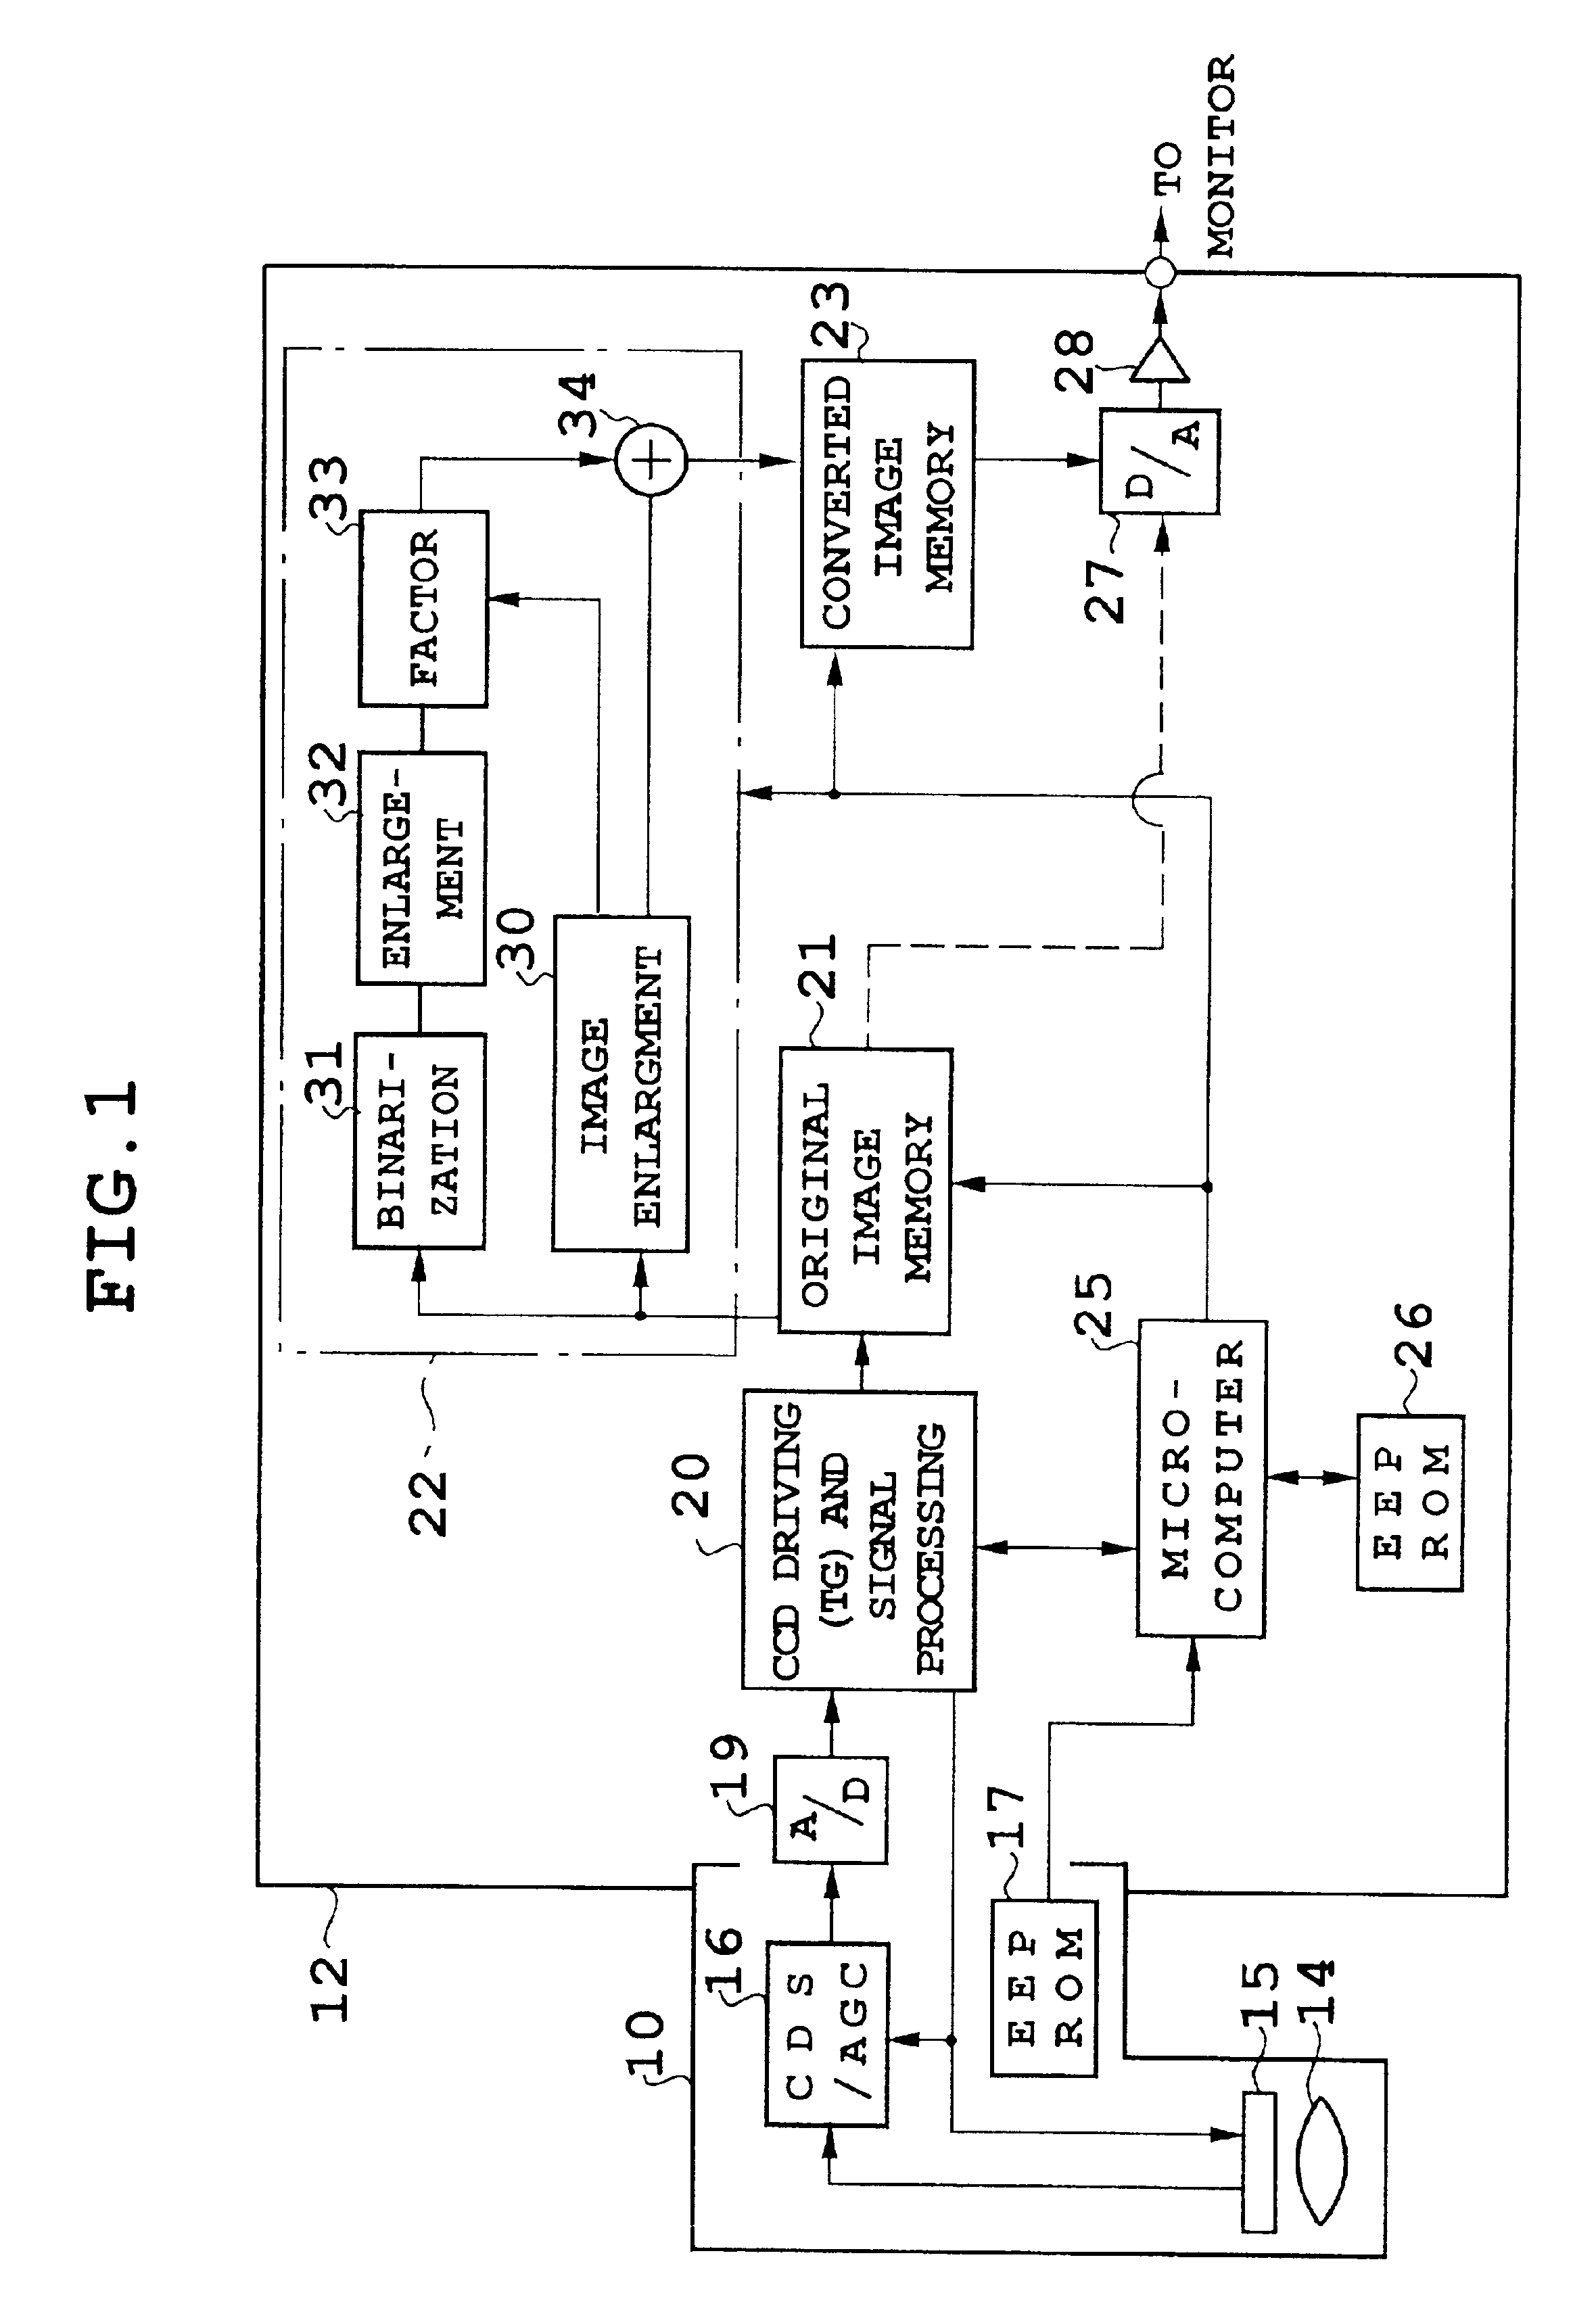 Electronic endoscope apparatus to which electronic endoscopes with different numbers of pixels can be connected